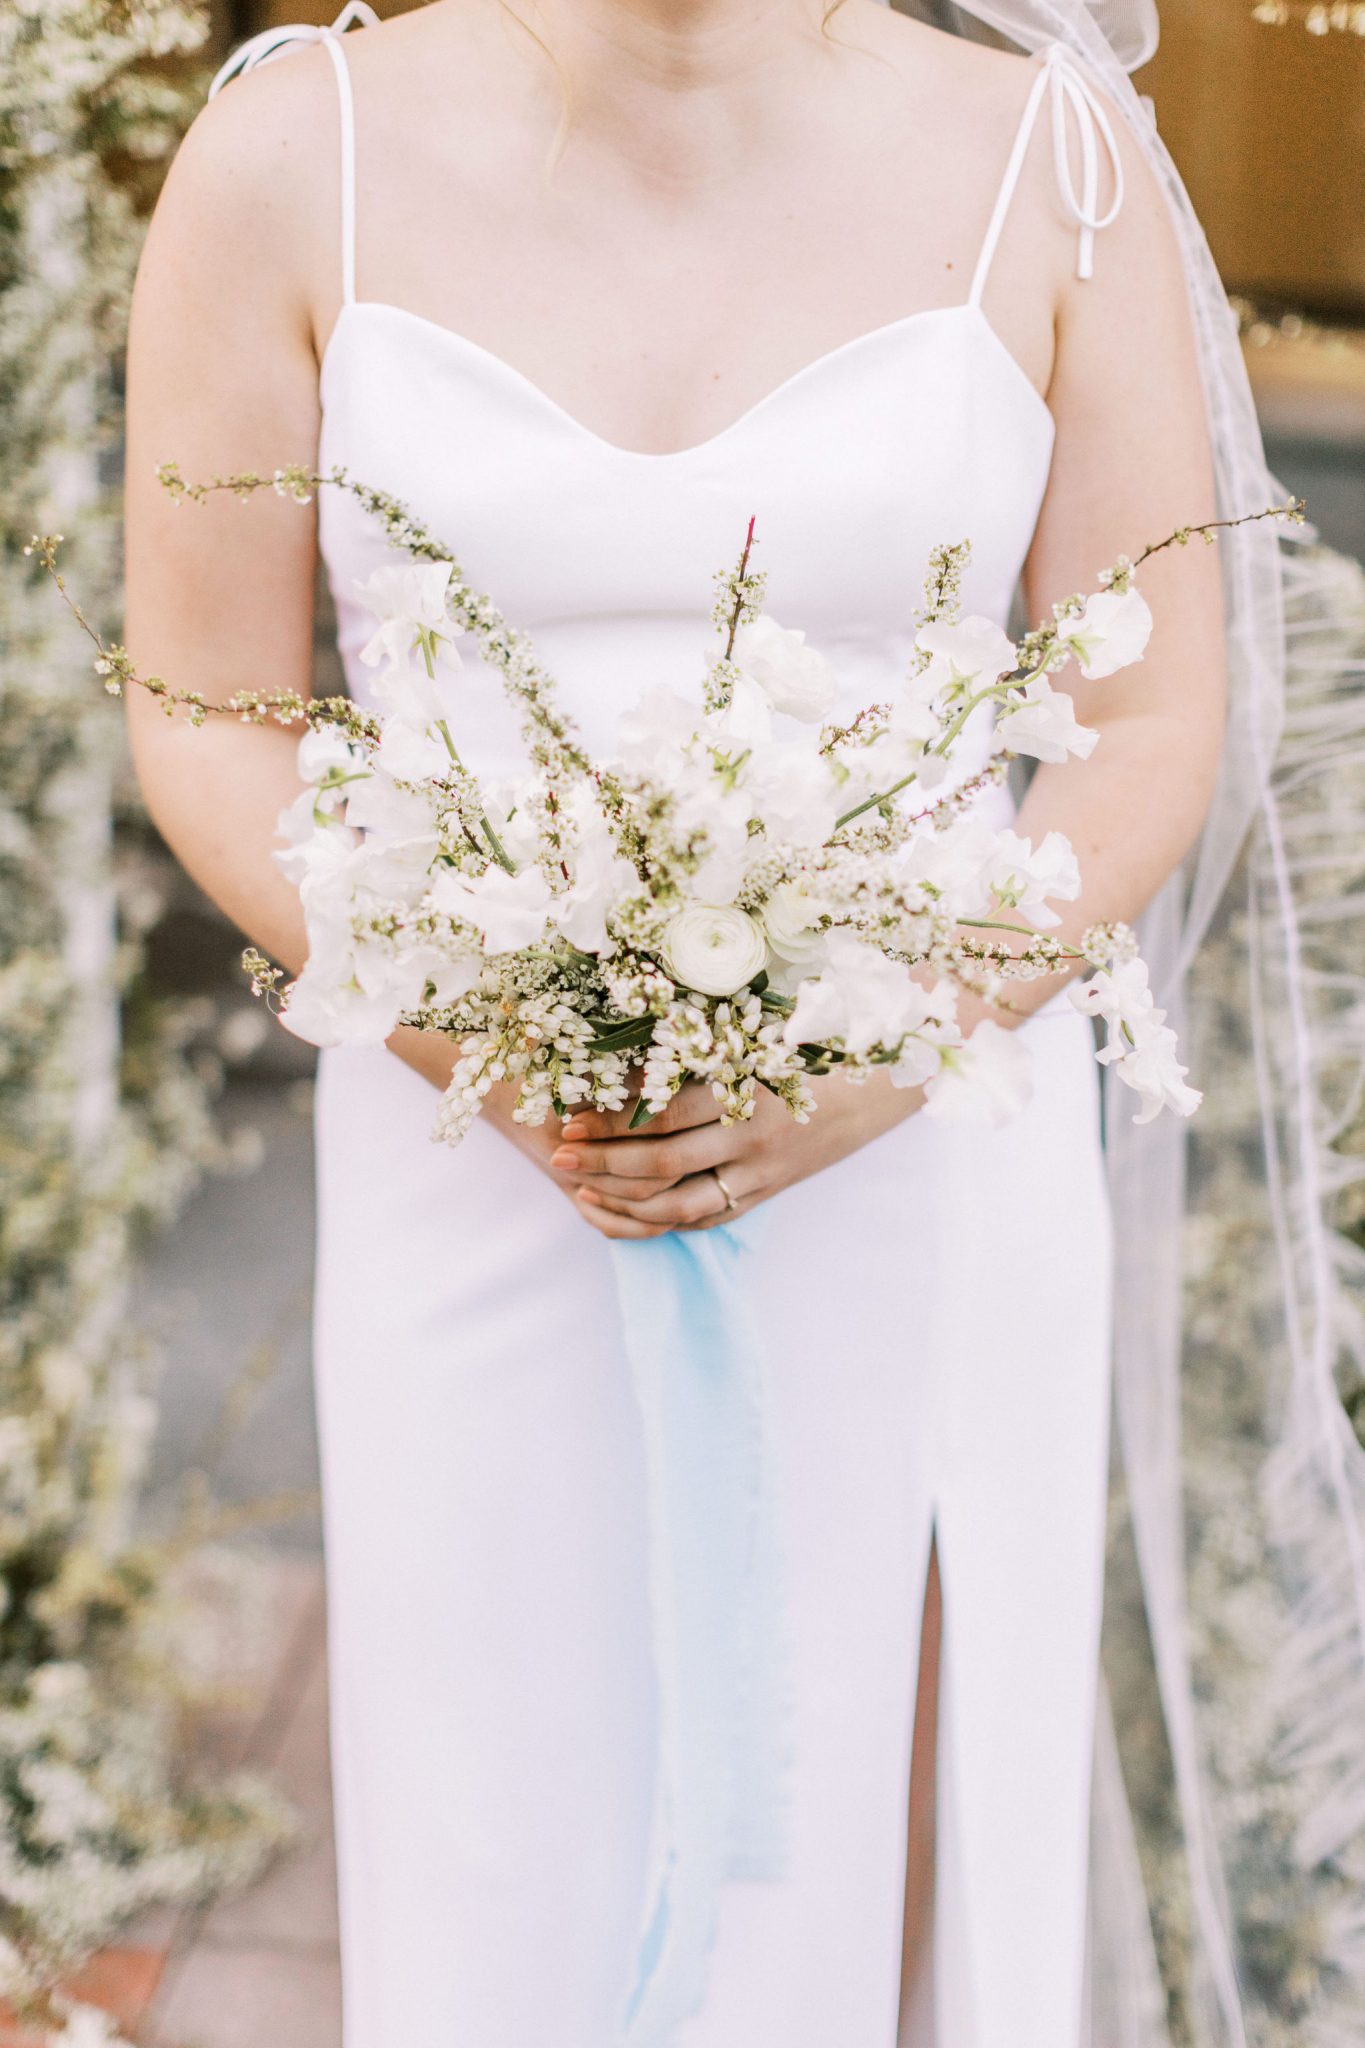 Modern bride in a white slip dress holding a monochromatic white bouquet with a blue ribbon